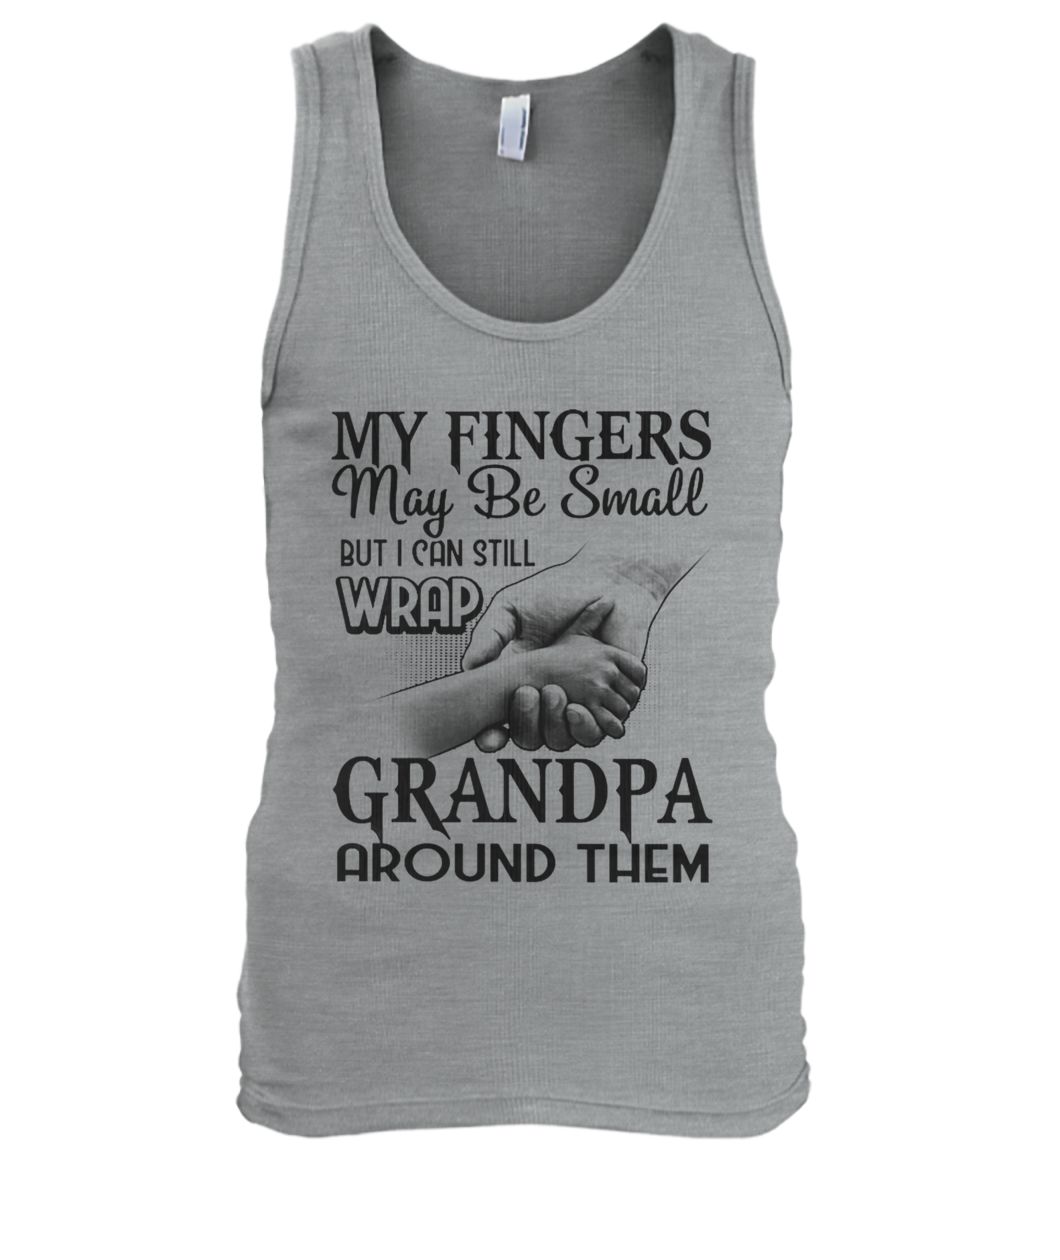 My fingers may be small but I can still wrap grandpa around them men's tank top